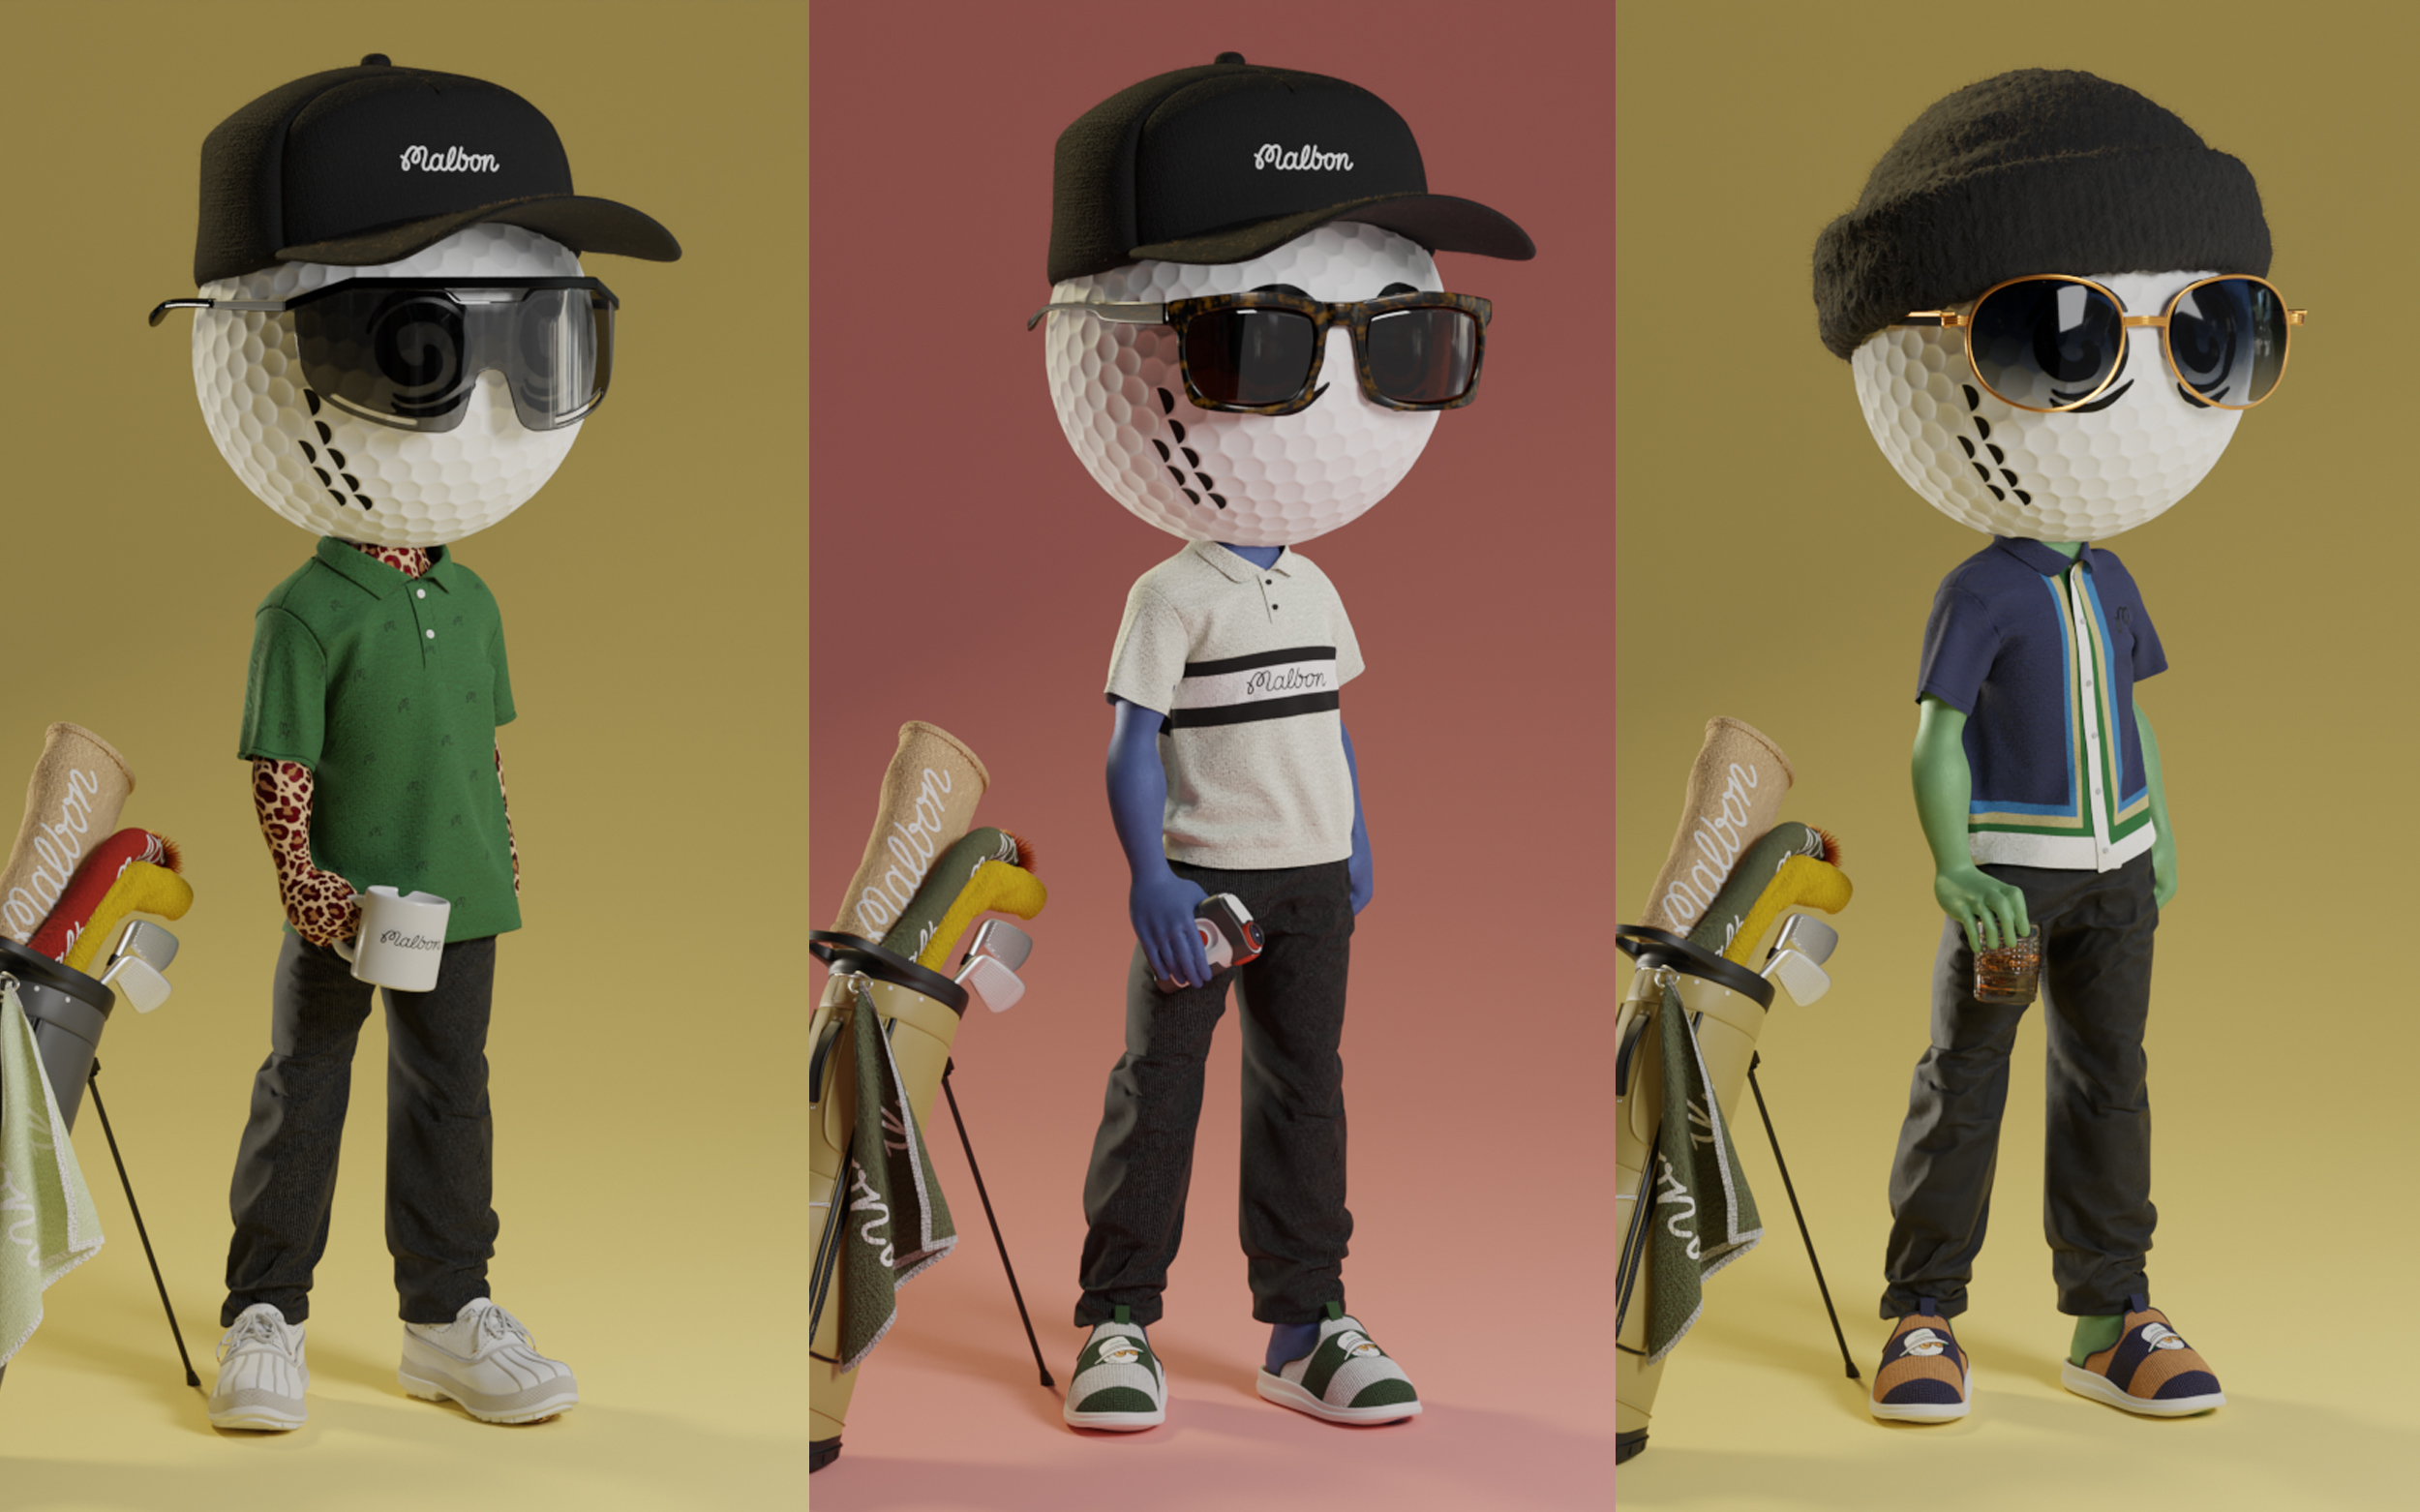 Malbon Golf to mint second 'Buckets Club' NFT collection this week | This  is the Loop 